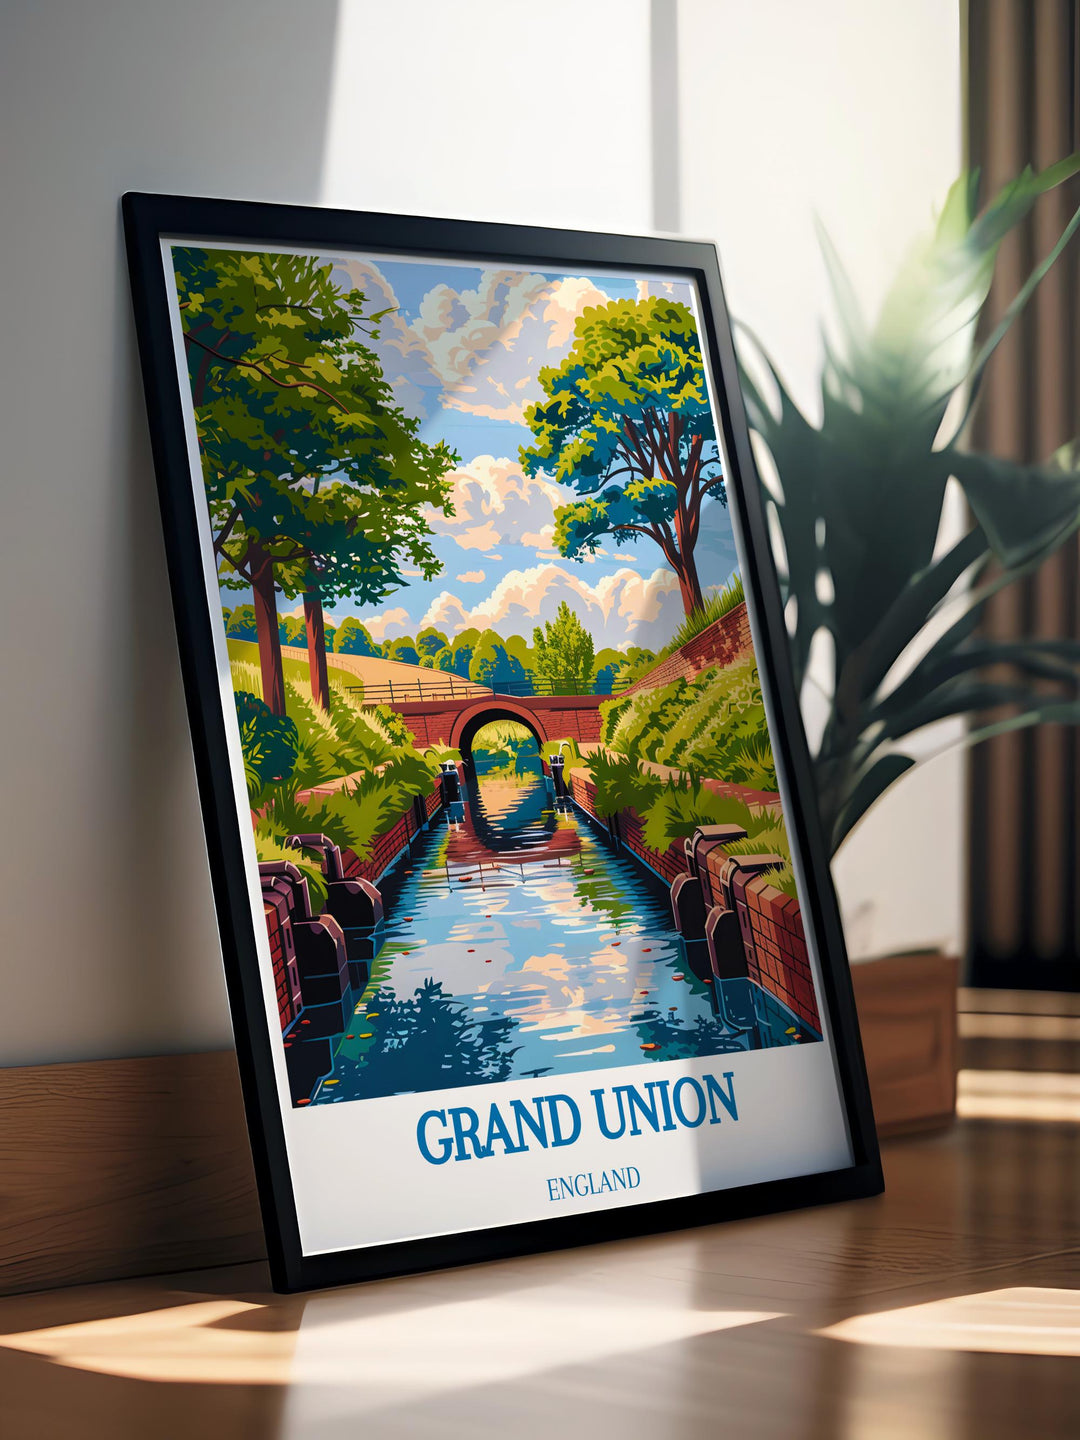 Detailed artwork of a serene boating scene on Grand Union Canal, ideal gift for those who cherish narrowboat art and peaceful landscapes.